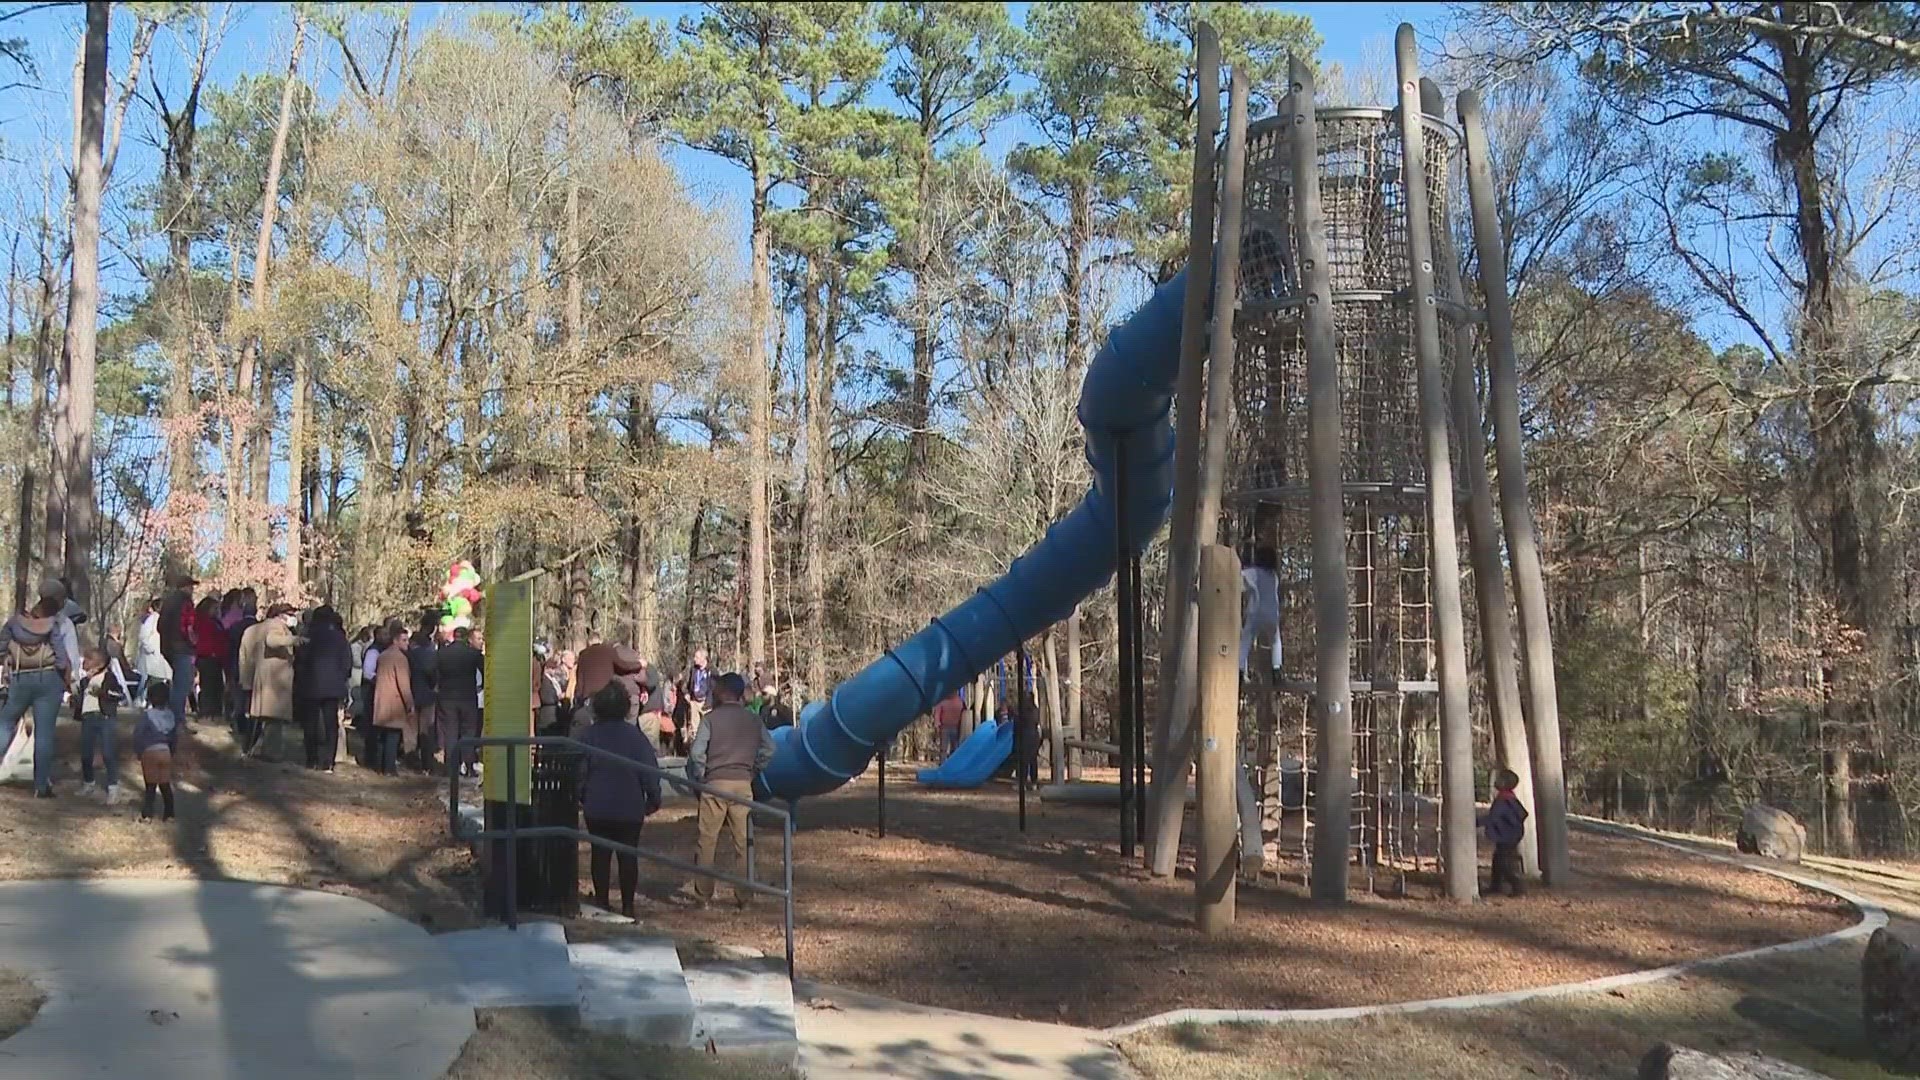 The new park is located on Danforth Road Southwest in Atlanta.